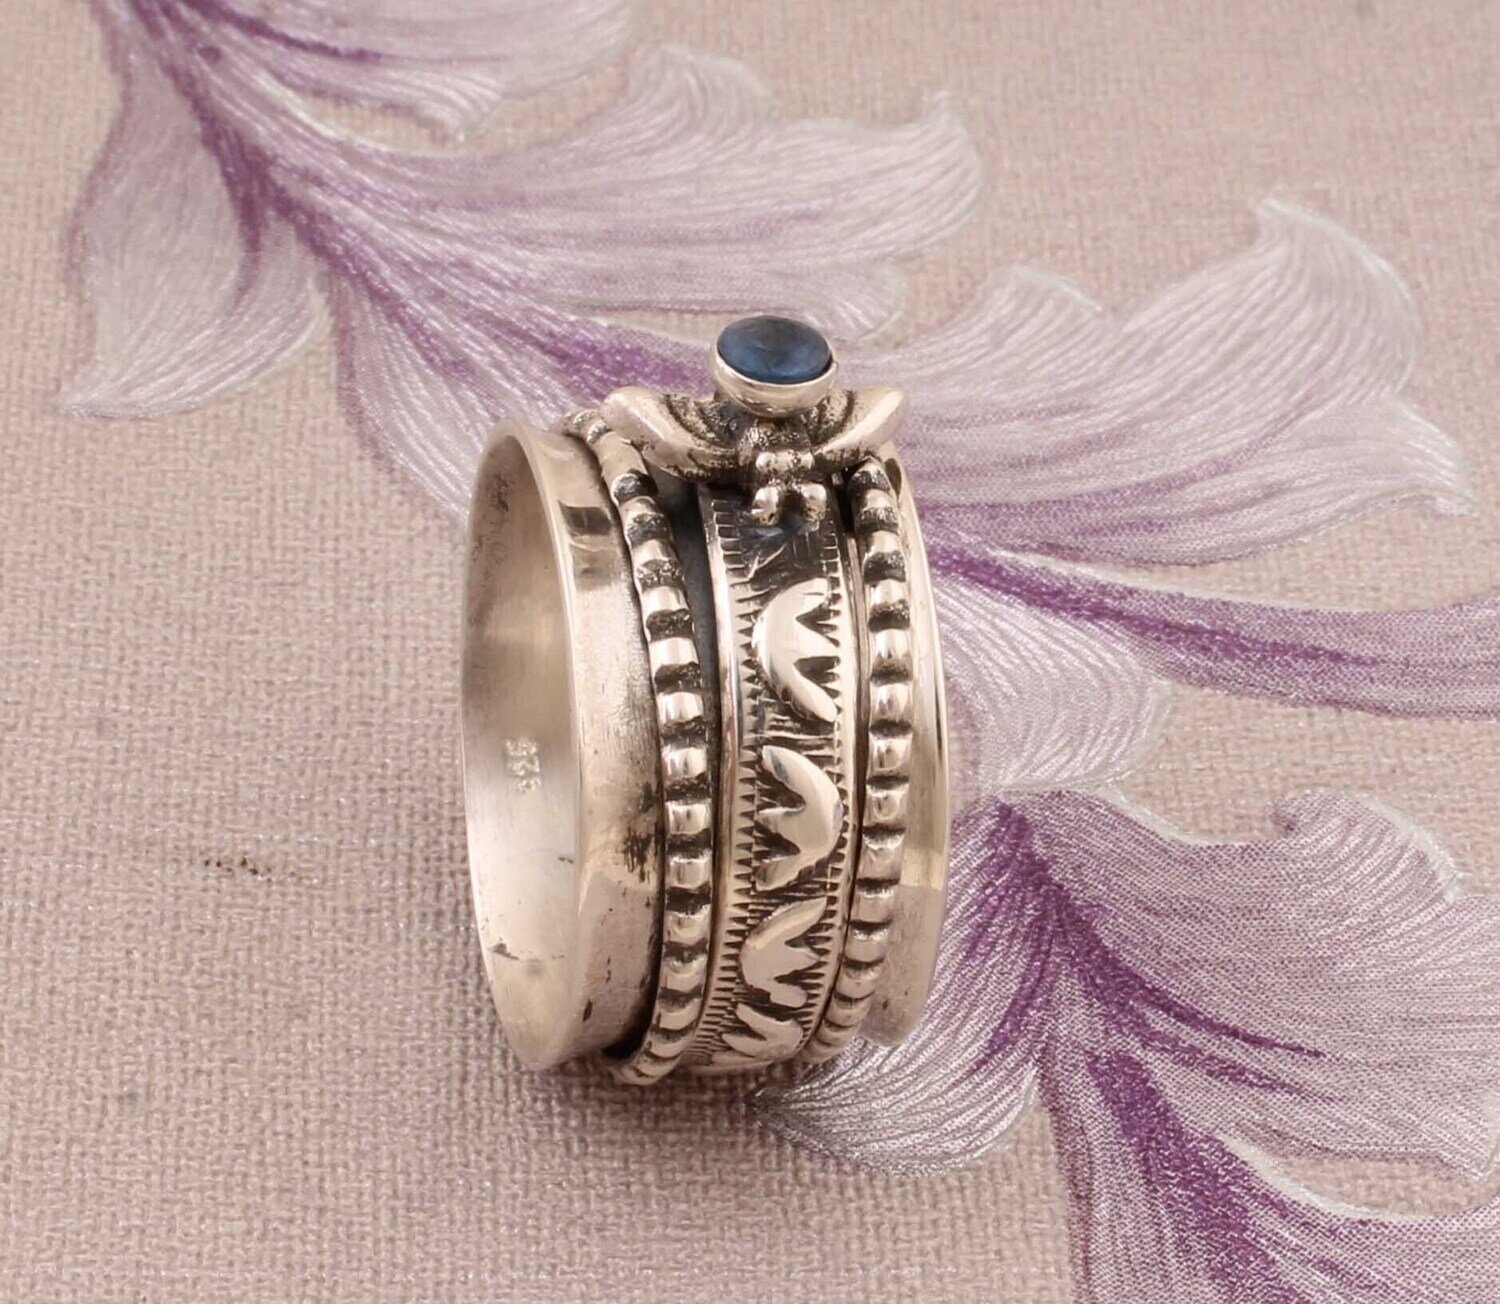 Aquamarine Top Quality Gemstone Ring 925-Antique Silver Ring,Silver Spinner Ring,Small Stone Ring Thumb Ring Spinner Ring Gift For Her